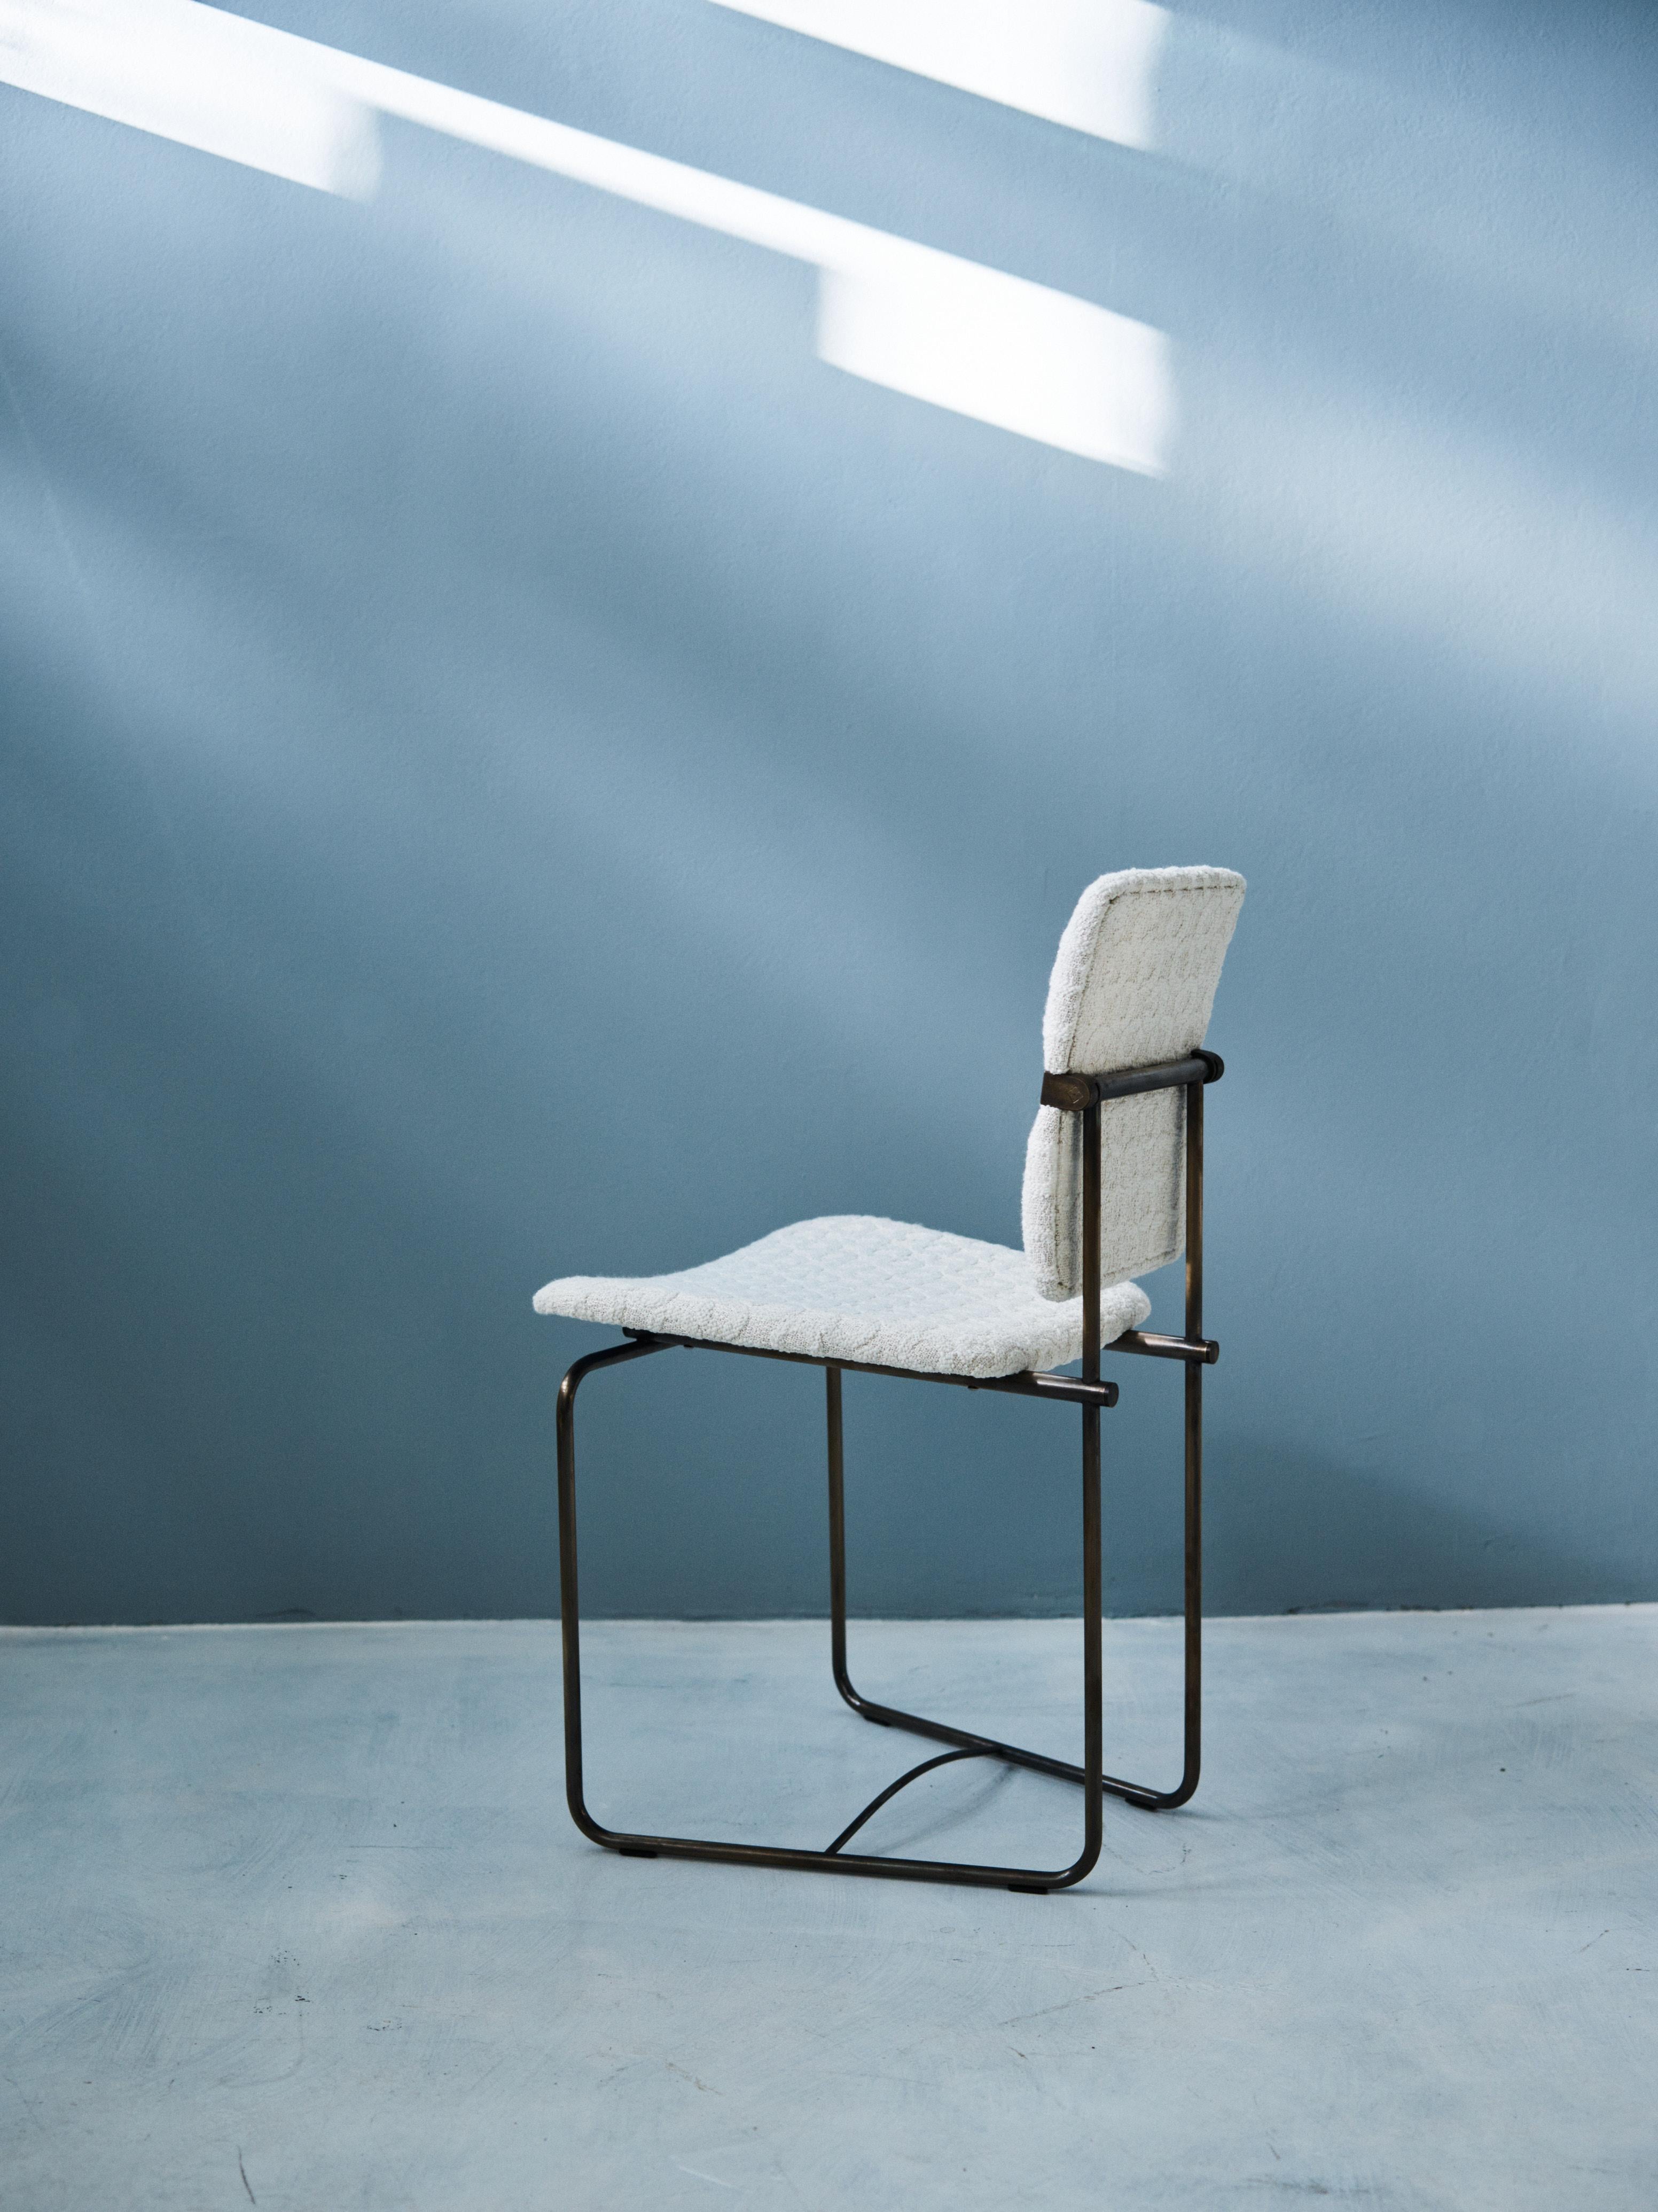 This late 20th century Bauhaus style Jodie S02 has remained a highly acclaimed design by Peter Ghyczy since coming on the market in 1986. It features a dynamic composition of thin light-weight aged brass framing and an adjustable backrest that